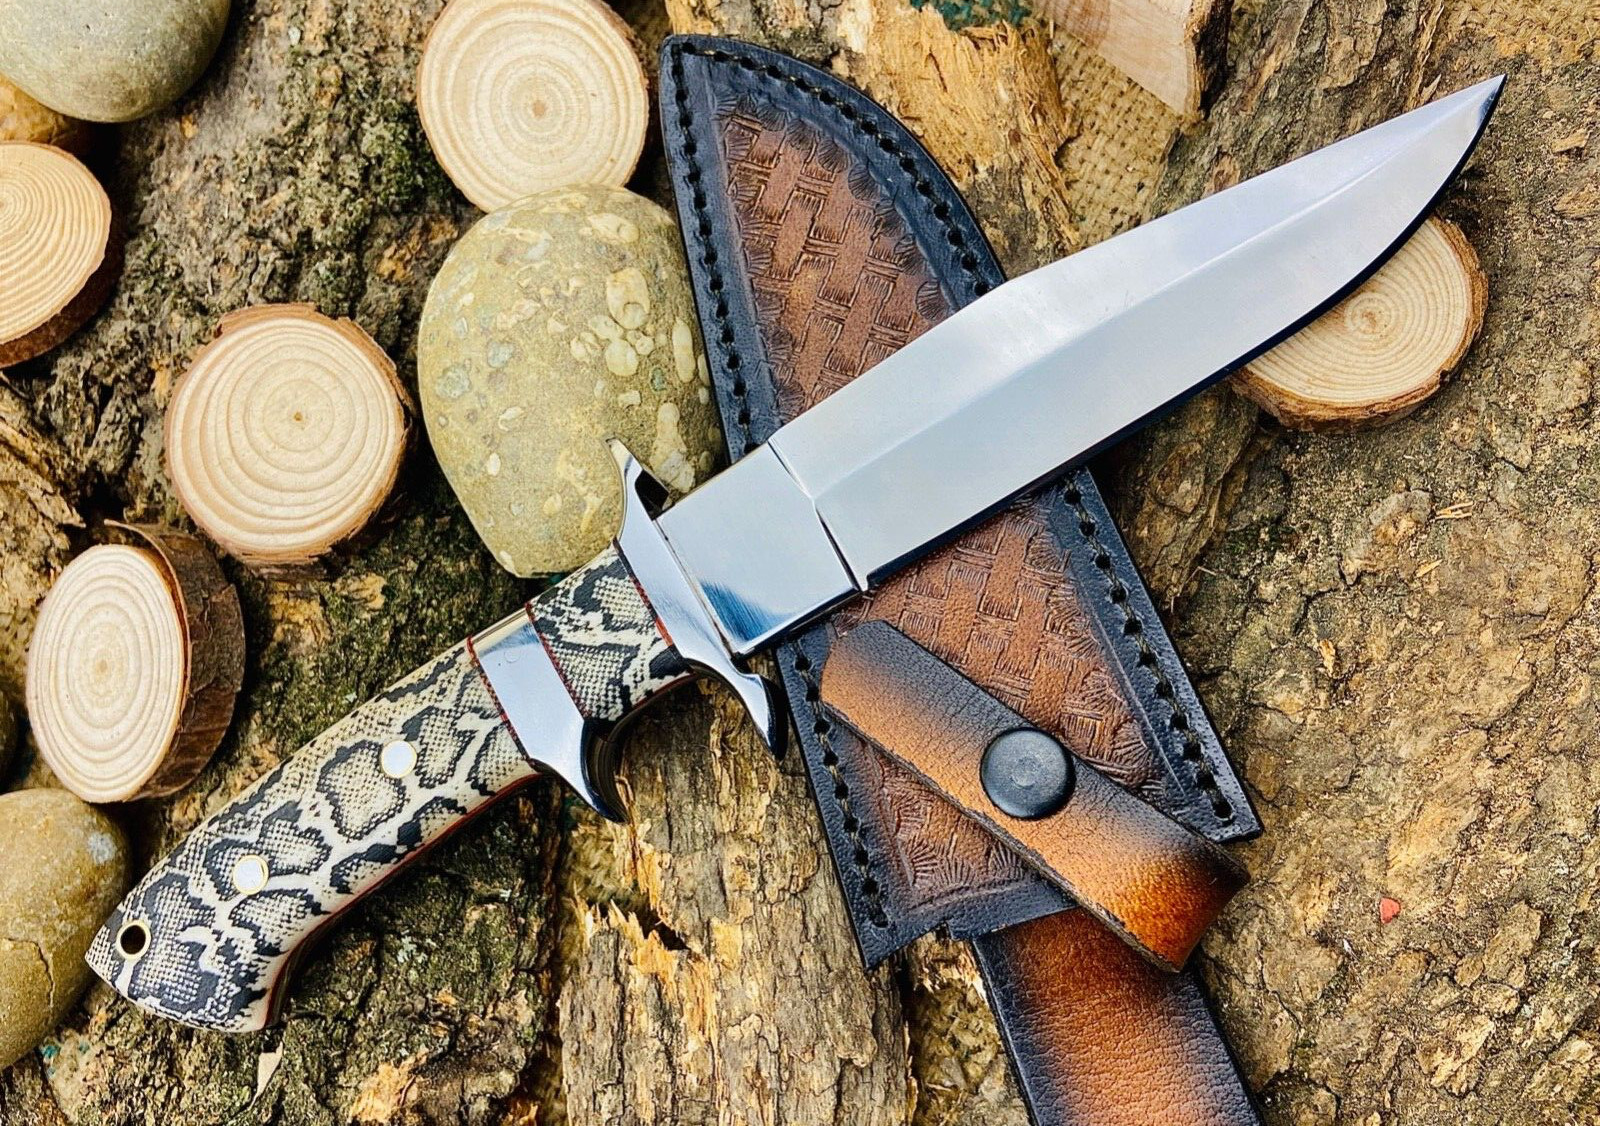 Custom Made Tactical Hunting Knife - Hand Forged High Polish Carbon Steel FI 449